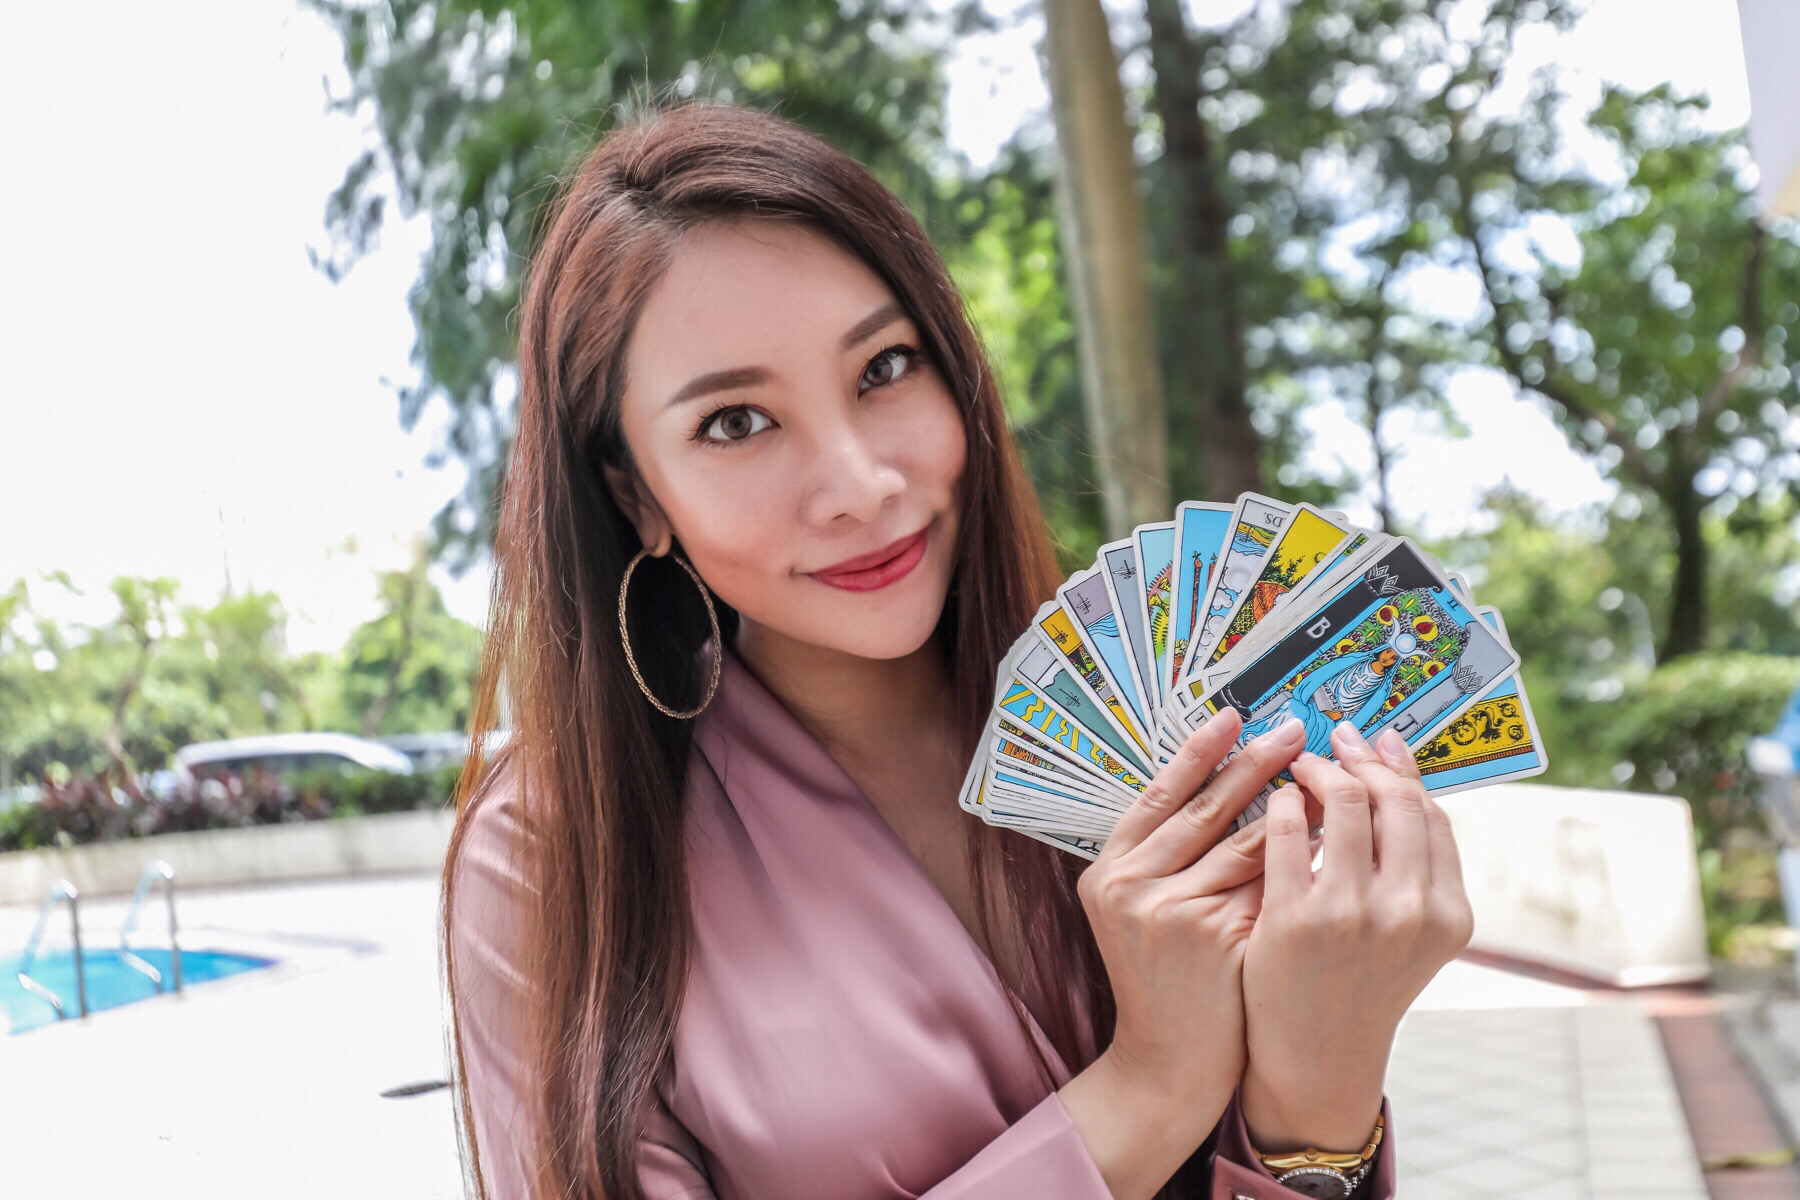 The Malaysian journalism graduate changing lives, one tarot card reading at a time